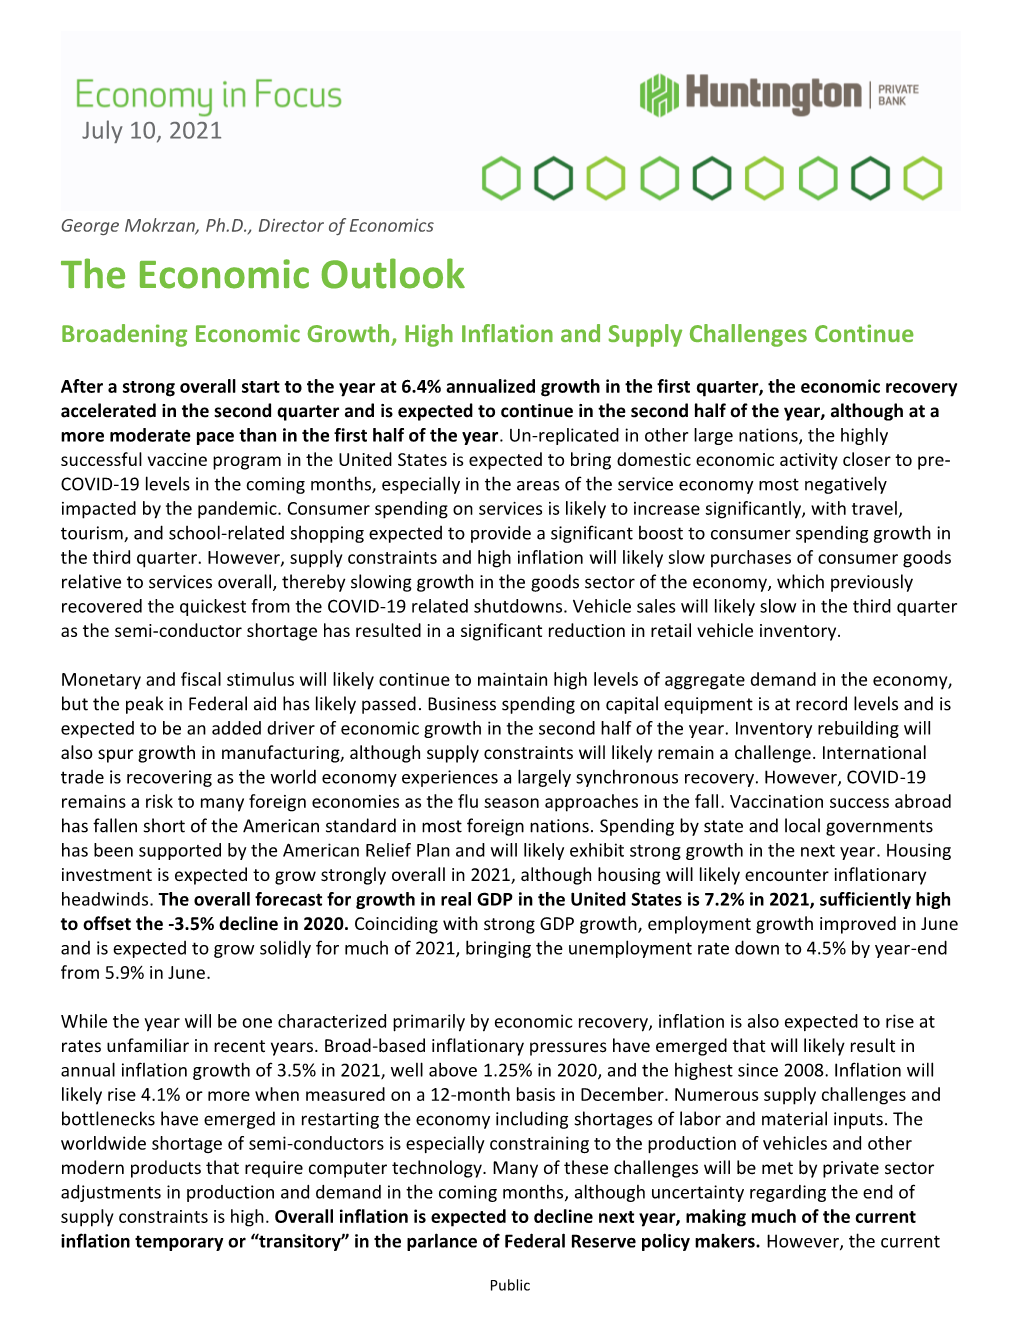 The Economic Outlook Broadening Economic Growth, High Inflation and Supply Challenges Continue